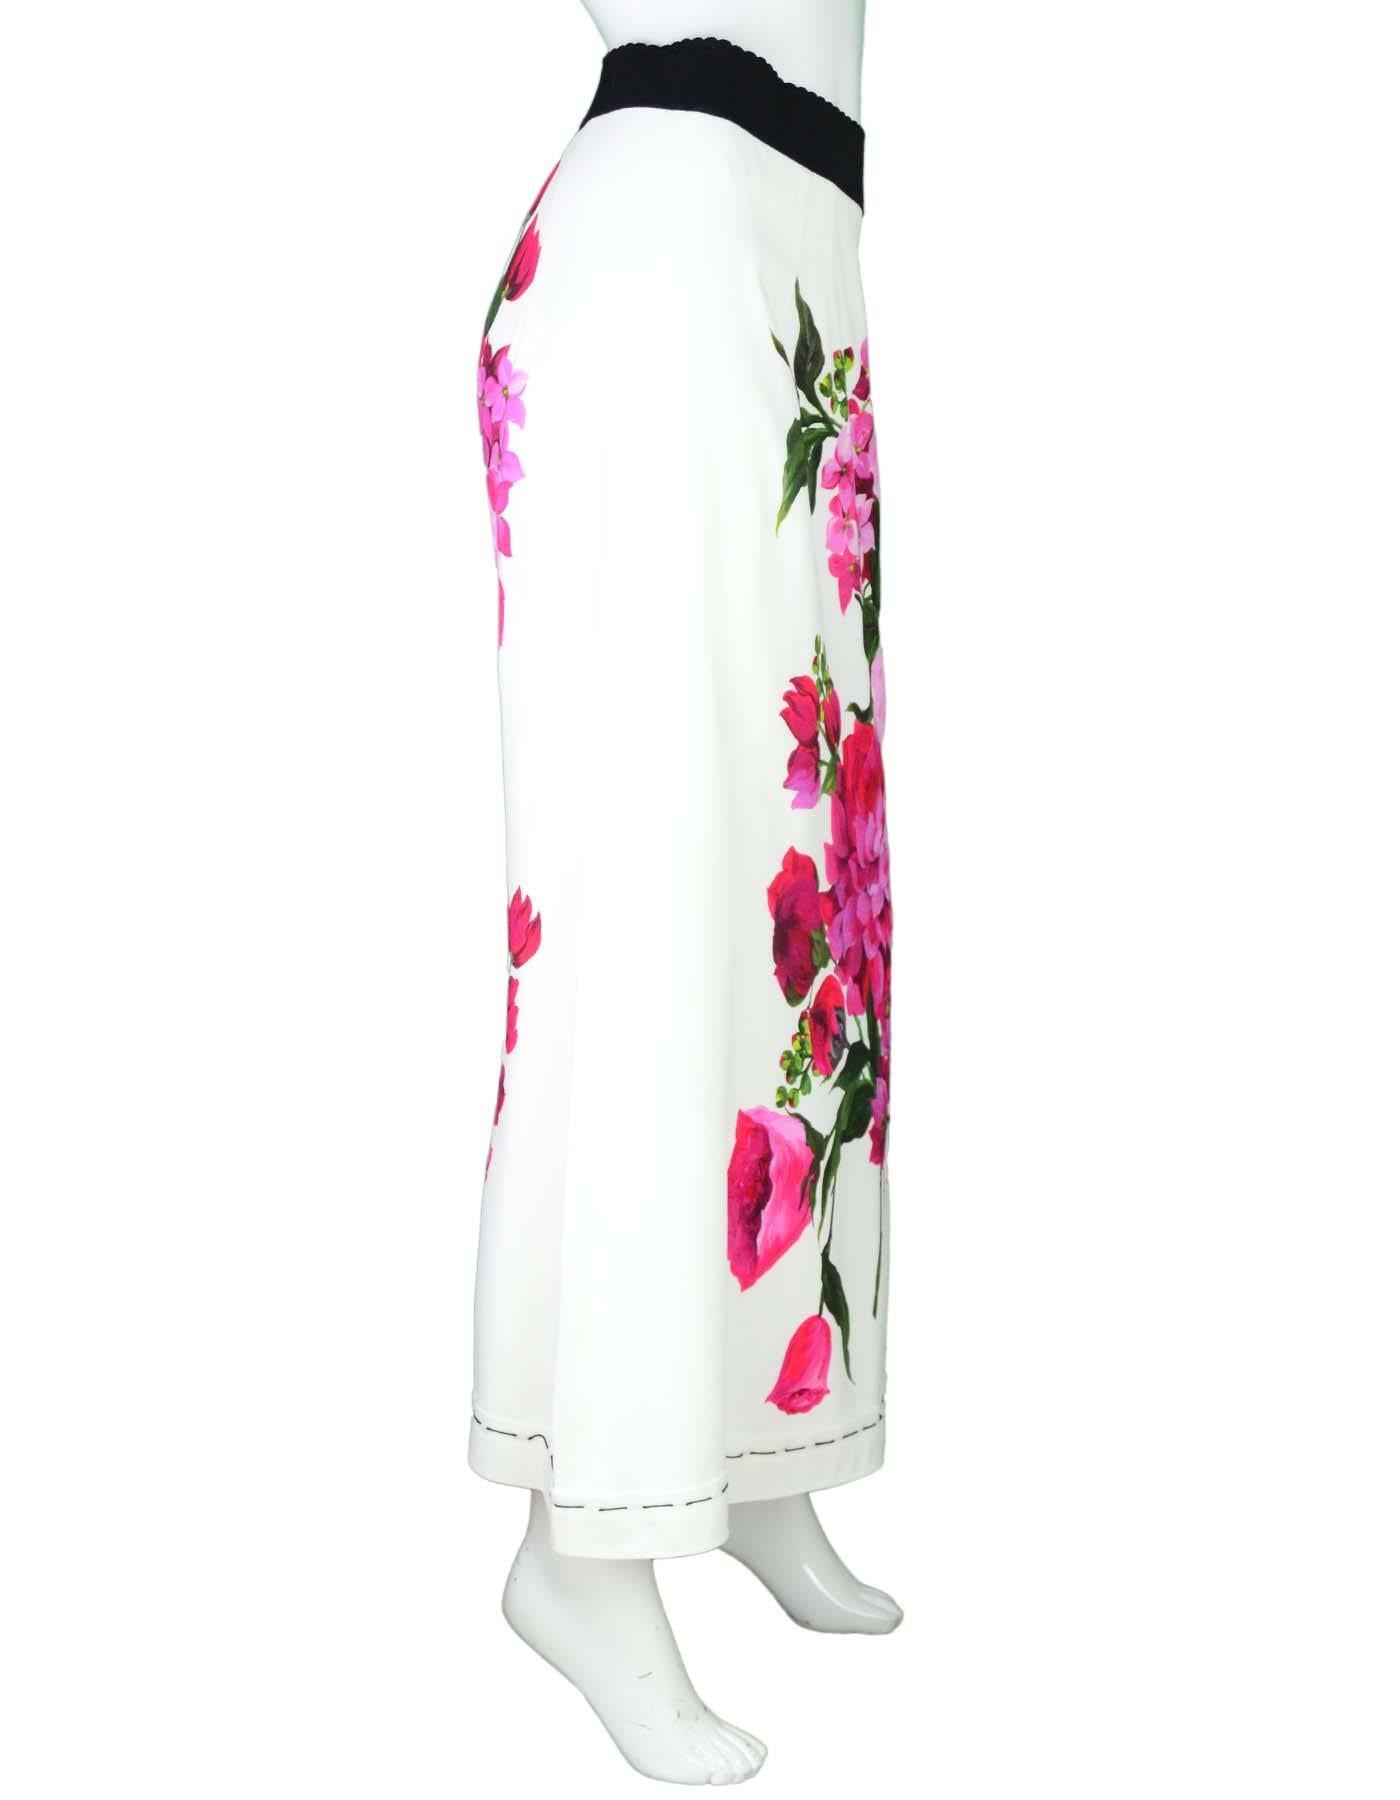  Dolce & Gabbana White Skirt with Floral Motif Sz 48 NWT

Made In: Italy
Color: Black, white, pink
Composition: 100% Rayon
Lining: White 94% Silk, 6% Elastane
Retail Price: $1,395 + tax
Closure/Opening: Zip closure at back
Overall Condition: